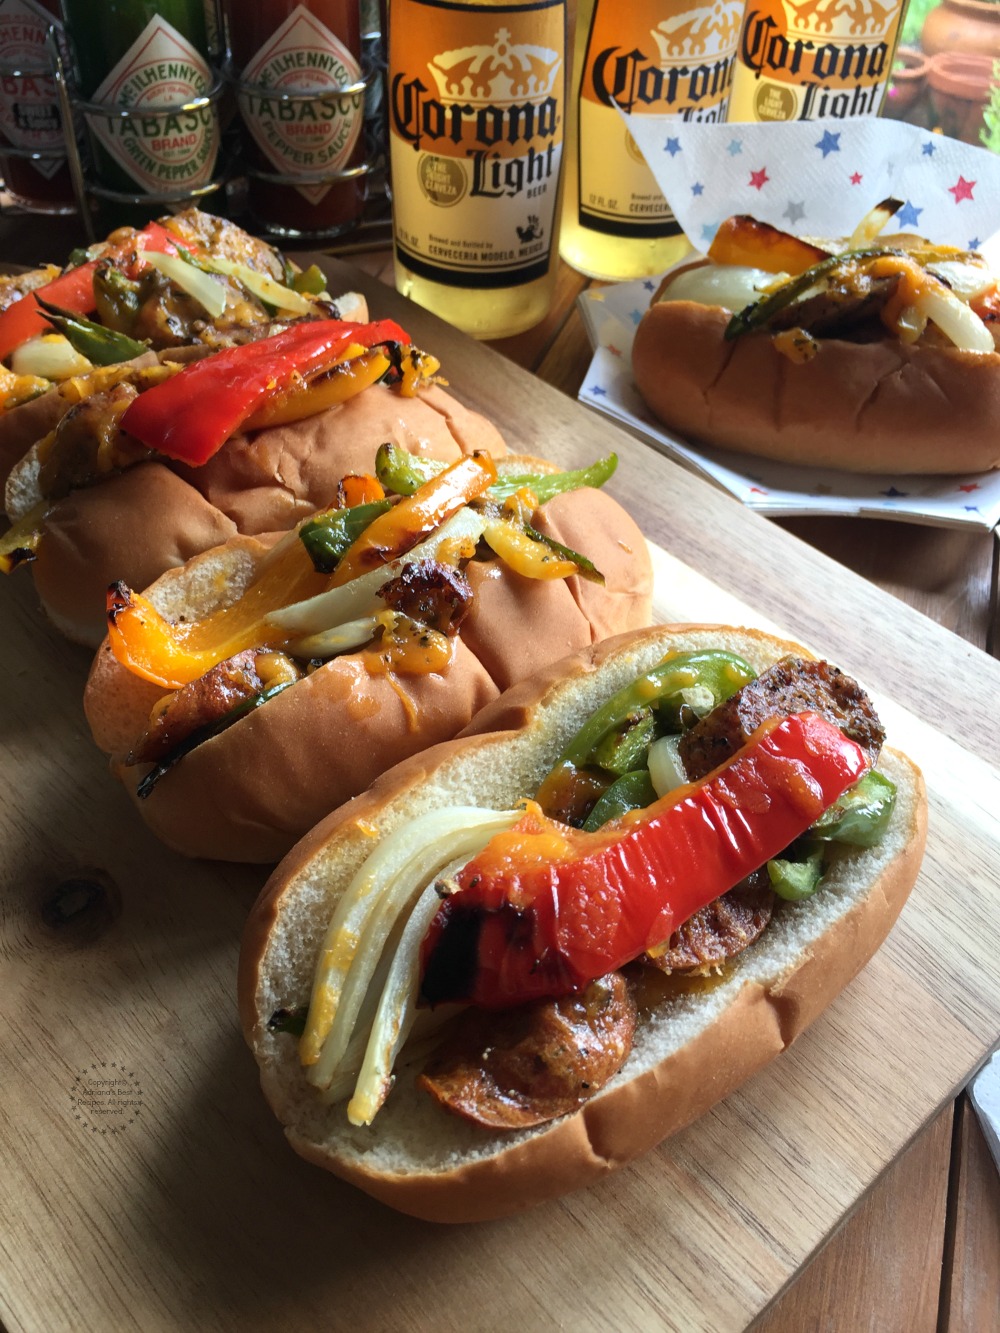 A tray with hot dogs and beer